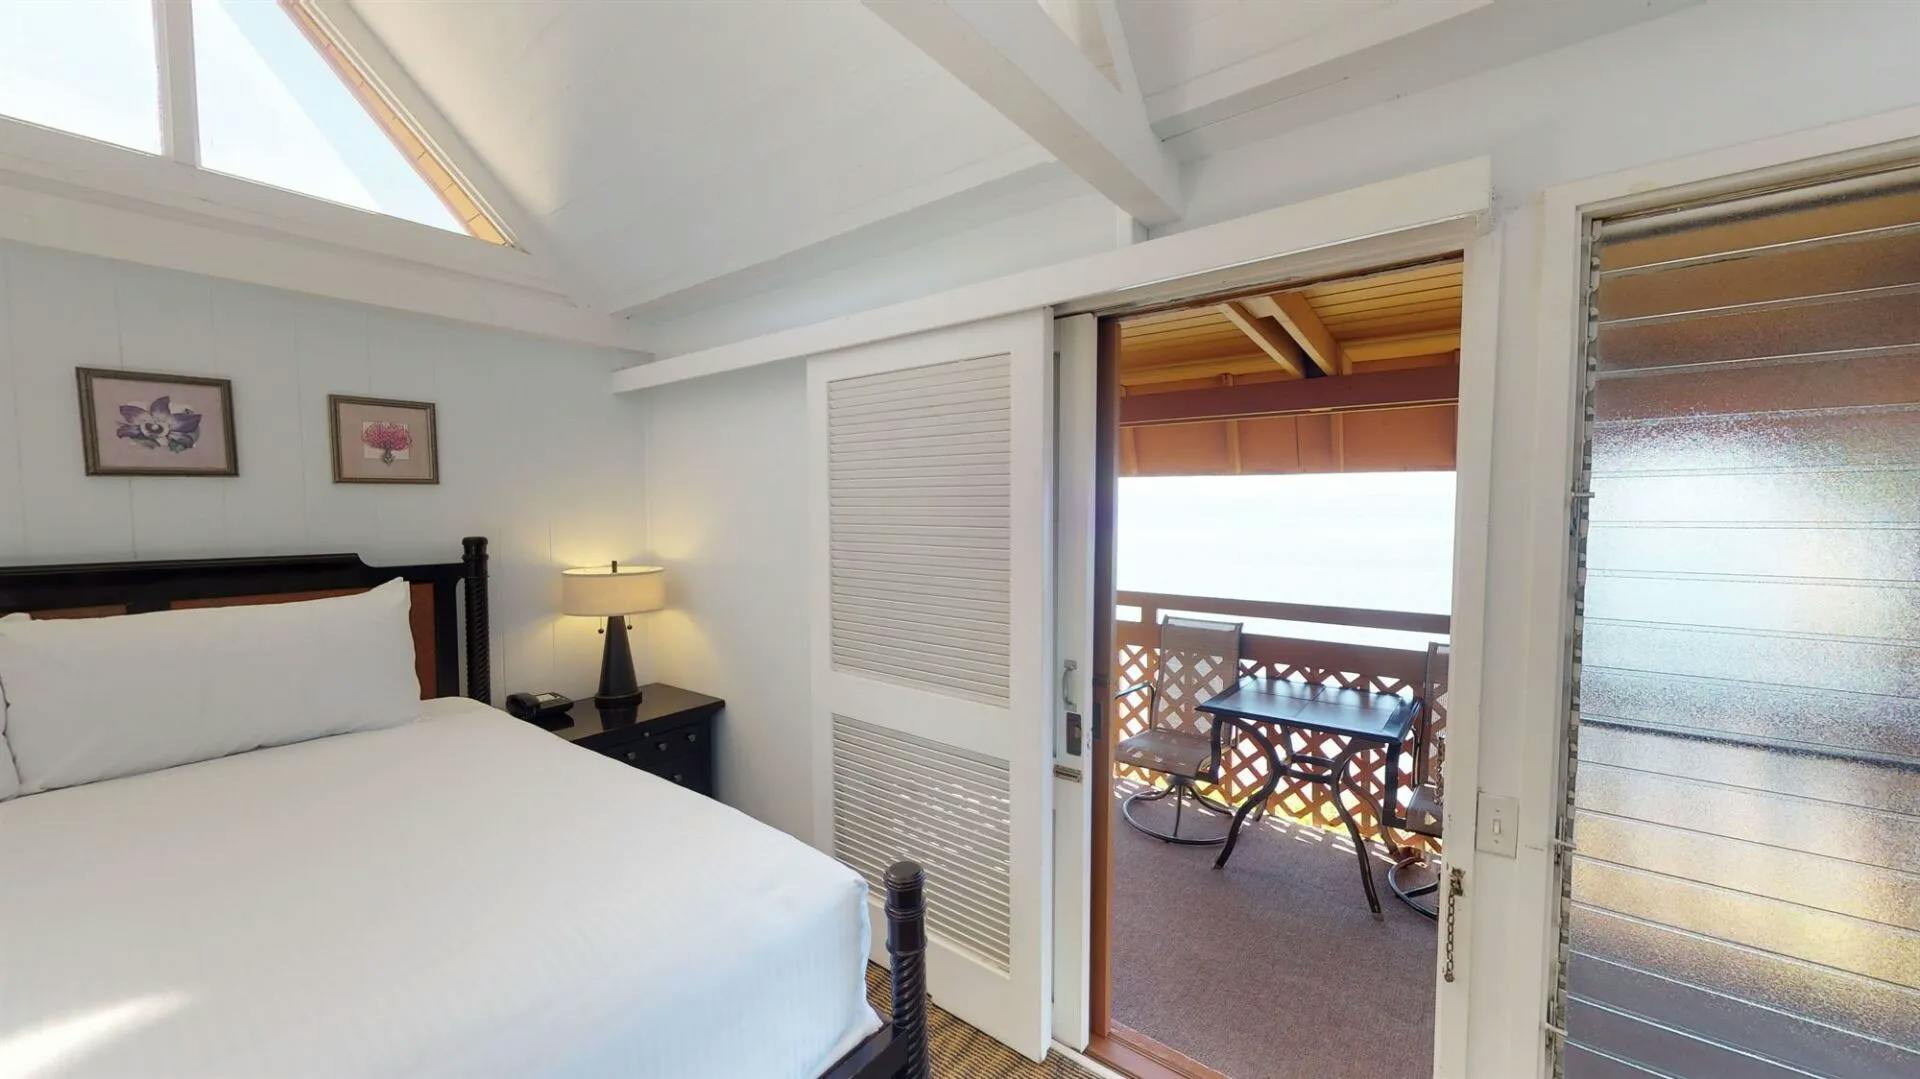 Oceanfront Room second floor bed and balcony 44a8d23b 1920w